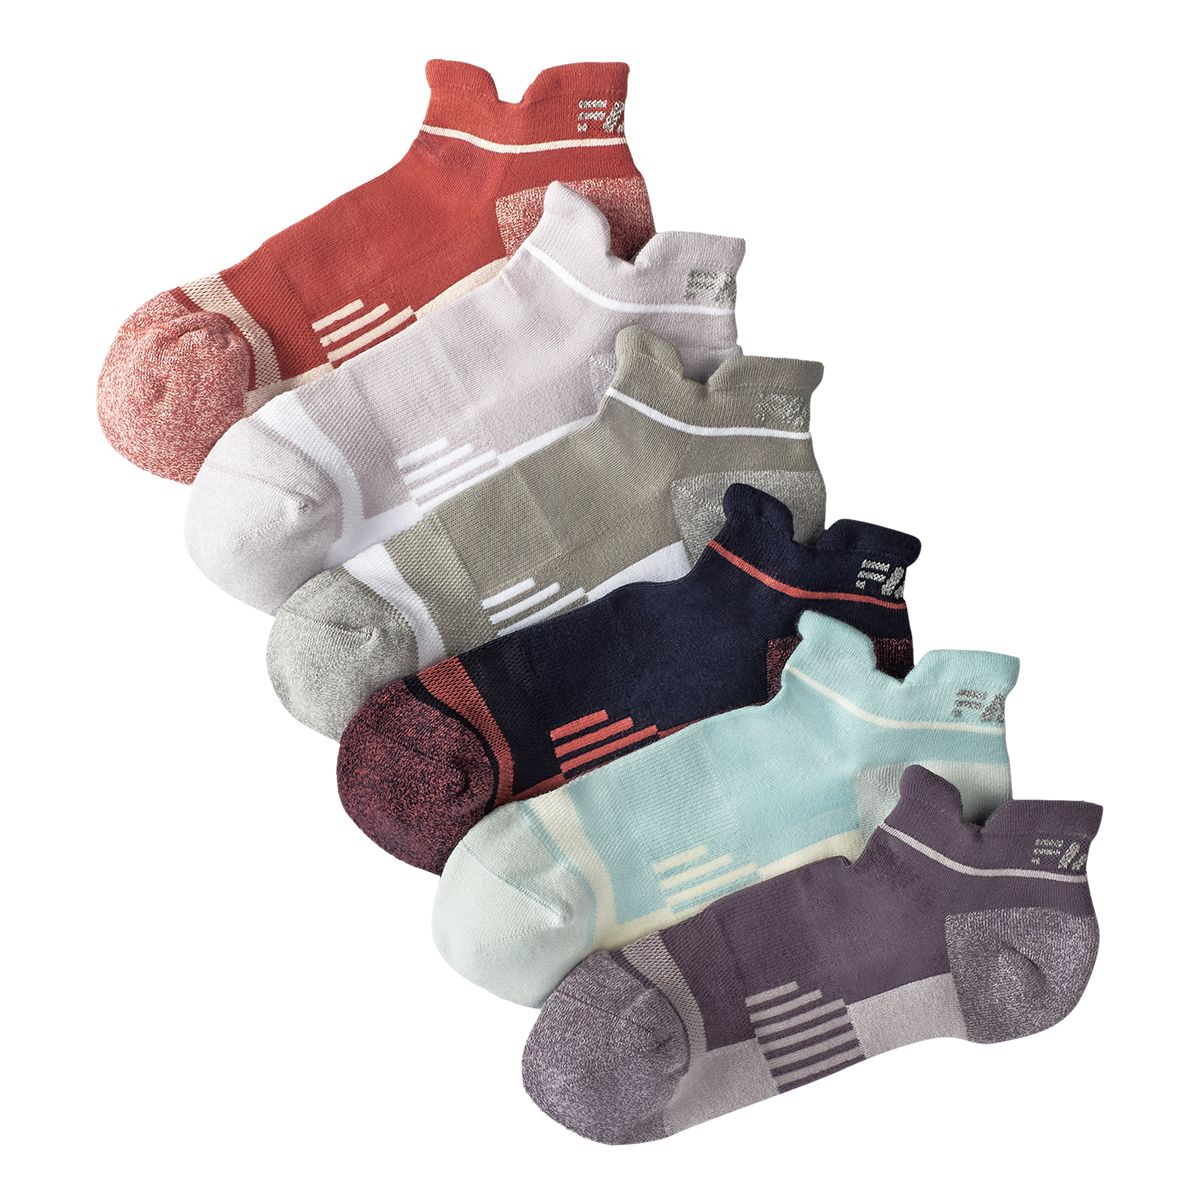 FWD Women's Athletic Run No Show Socks - 6 Pack